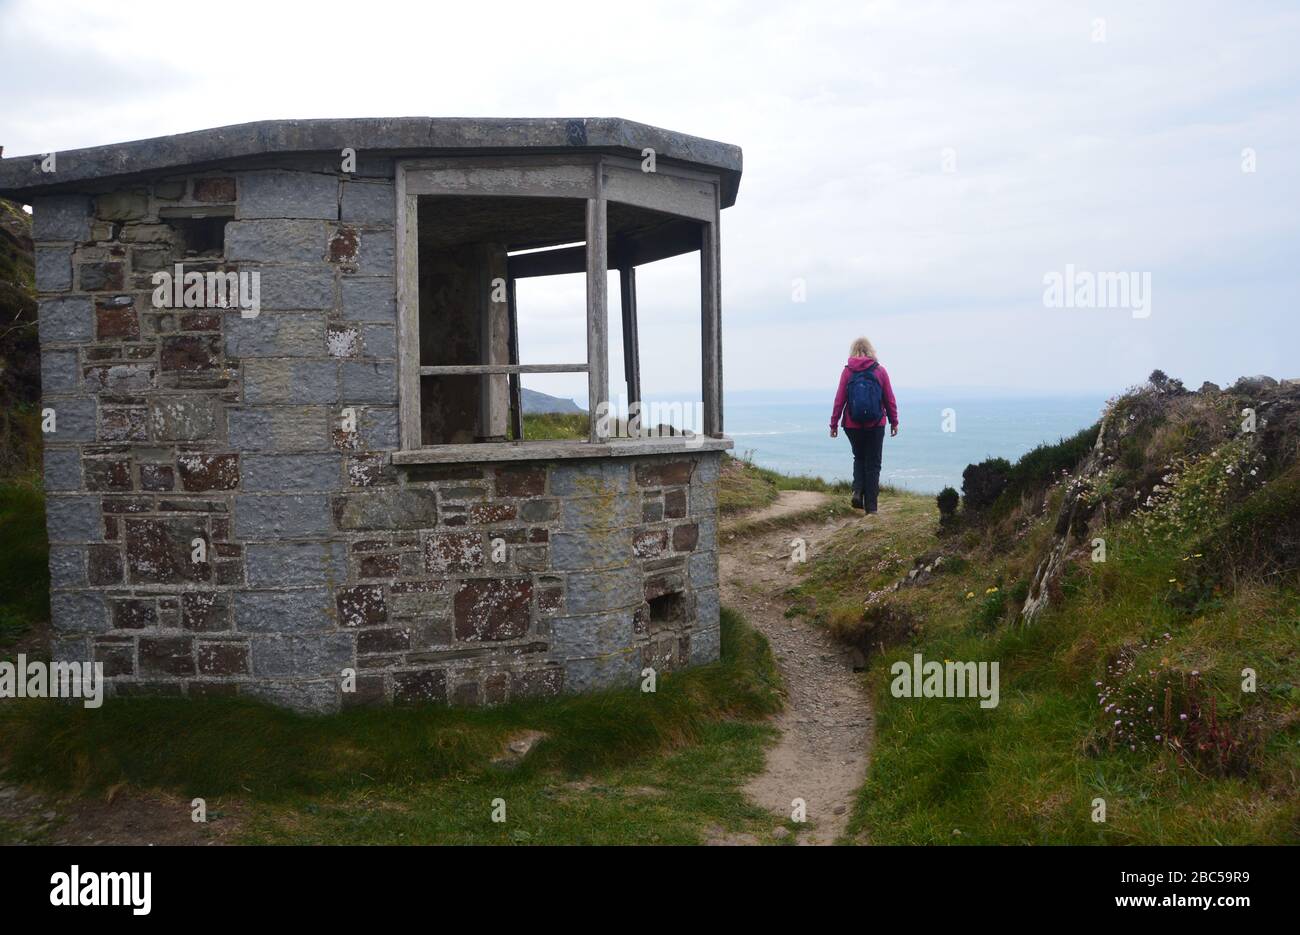 Lone Woman Hiker Walking by Disused Lookout Post on Higher Sharpnose Point on the South West Coastal Path, North Cornwall, England, UK Foto Stock